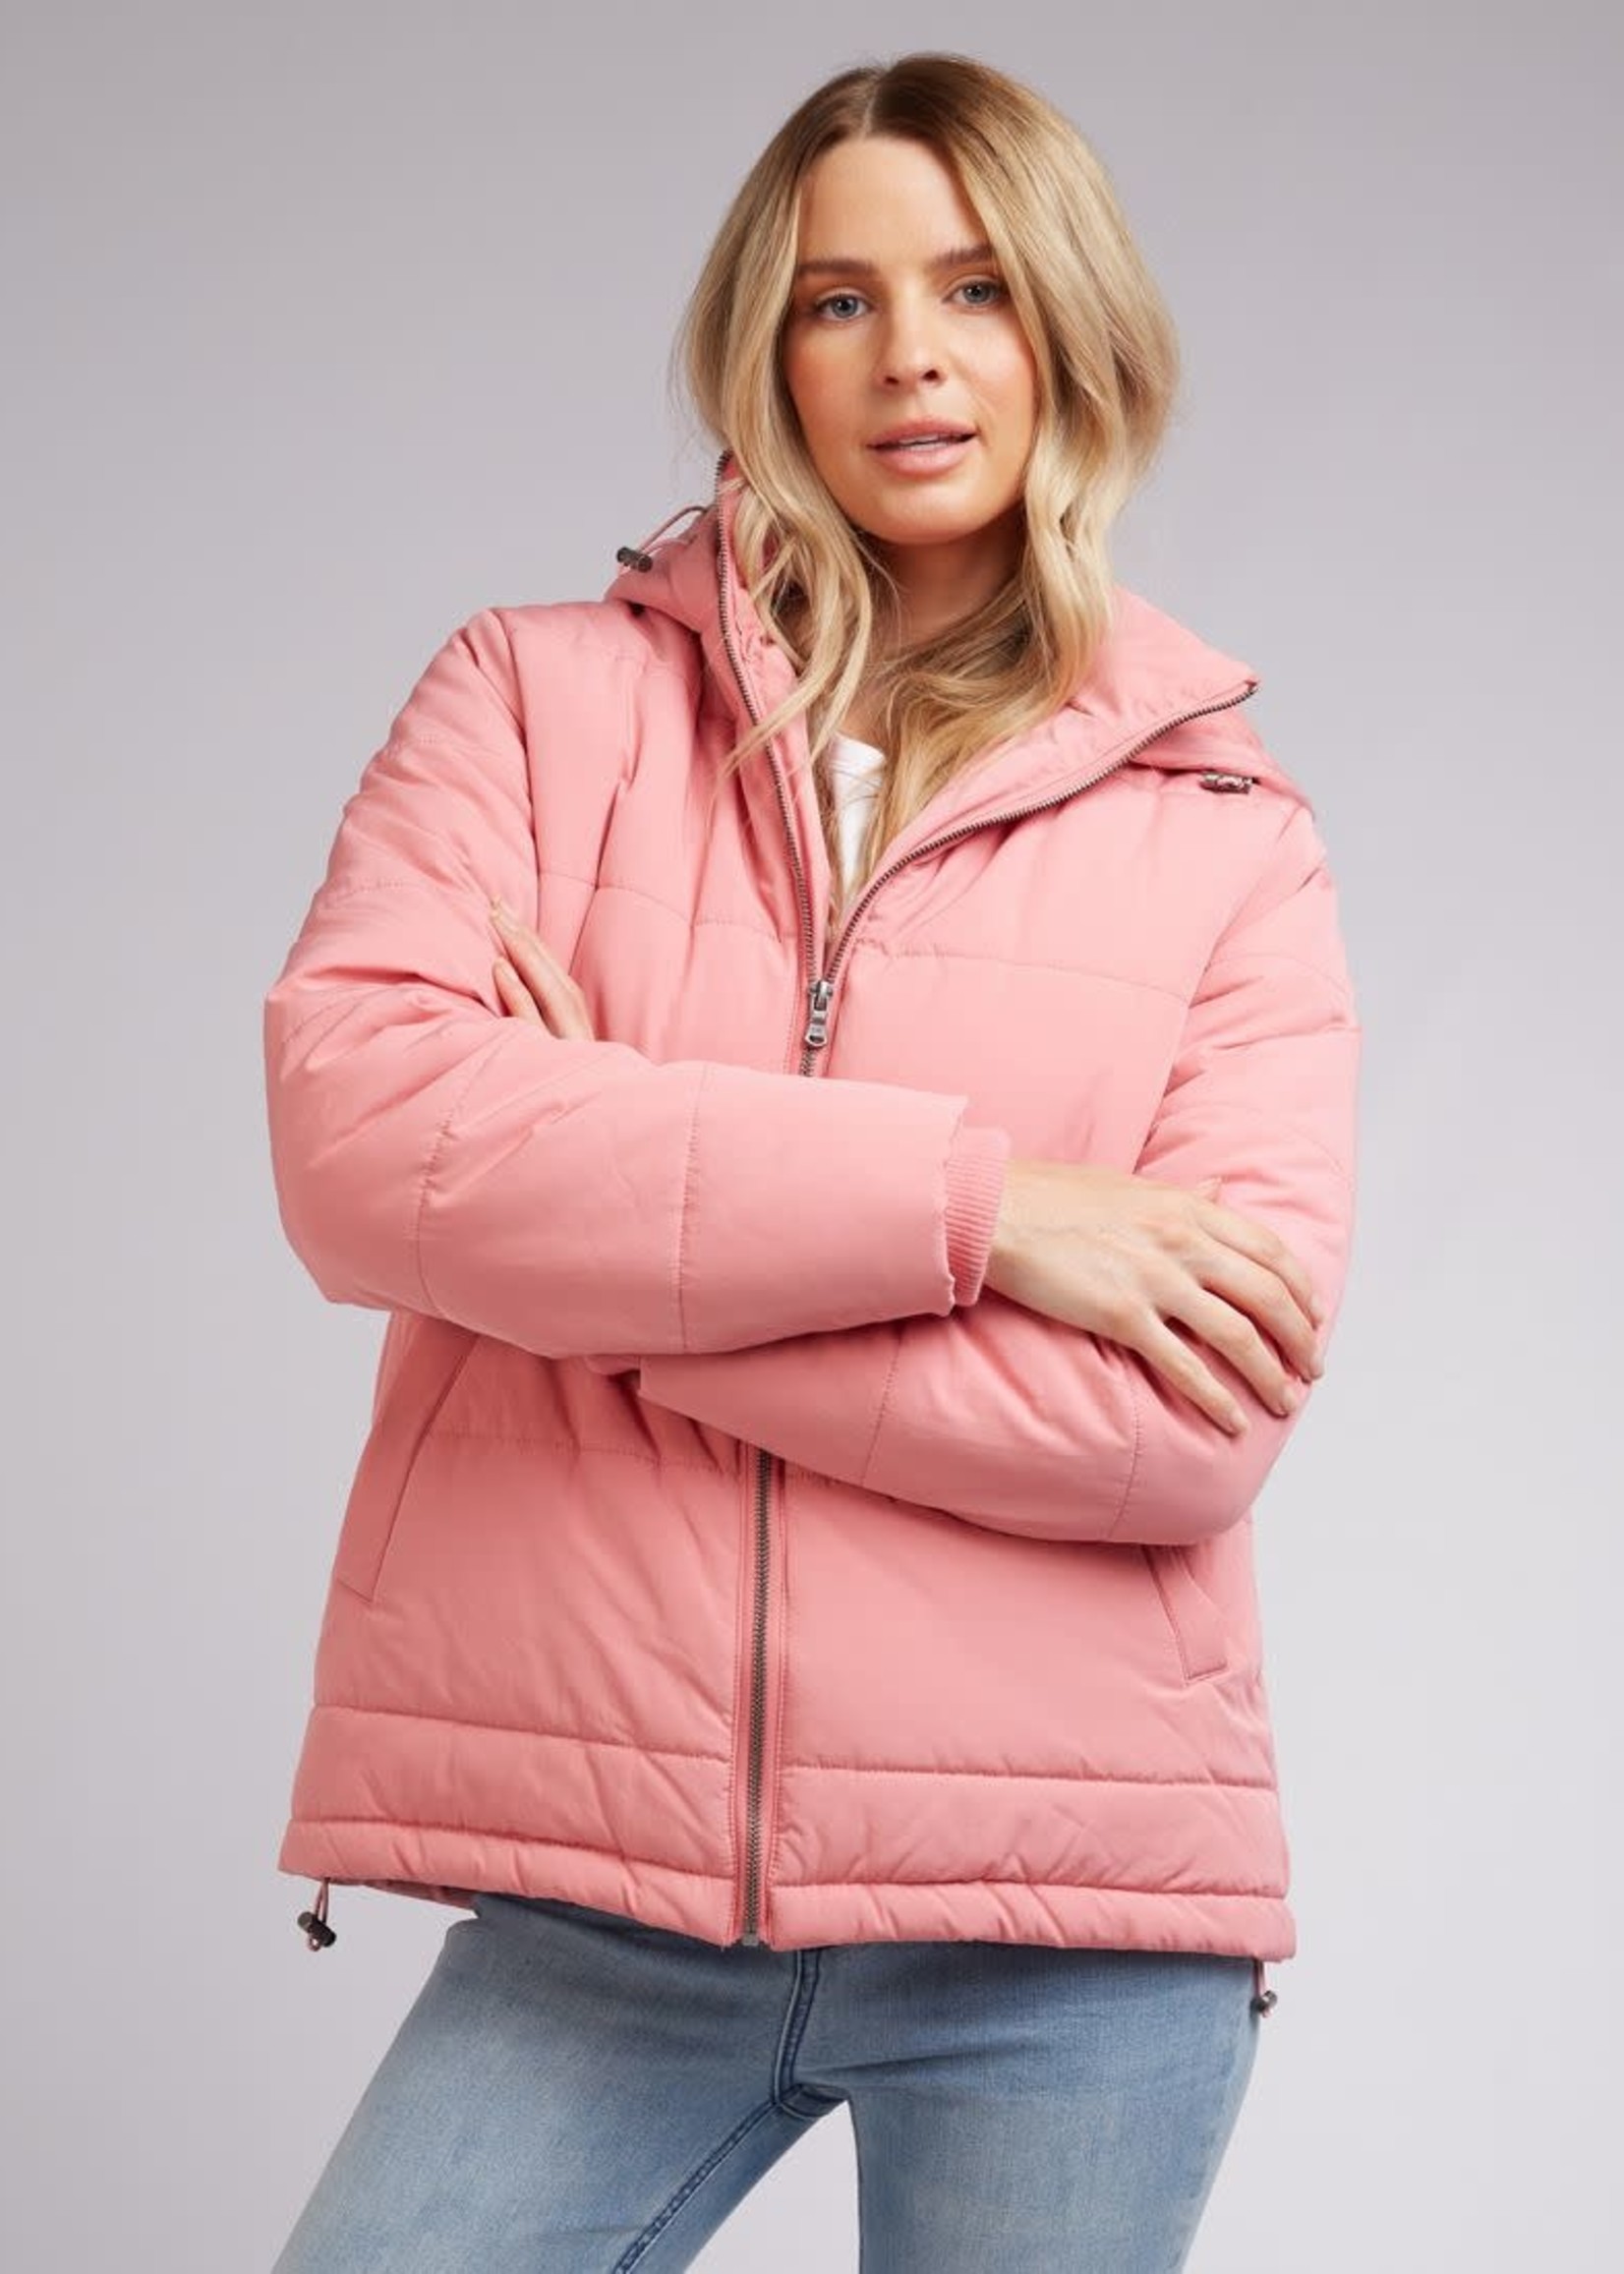 All About Eve Essential Puffer Jacket (Rose)